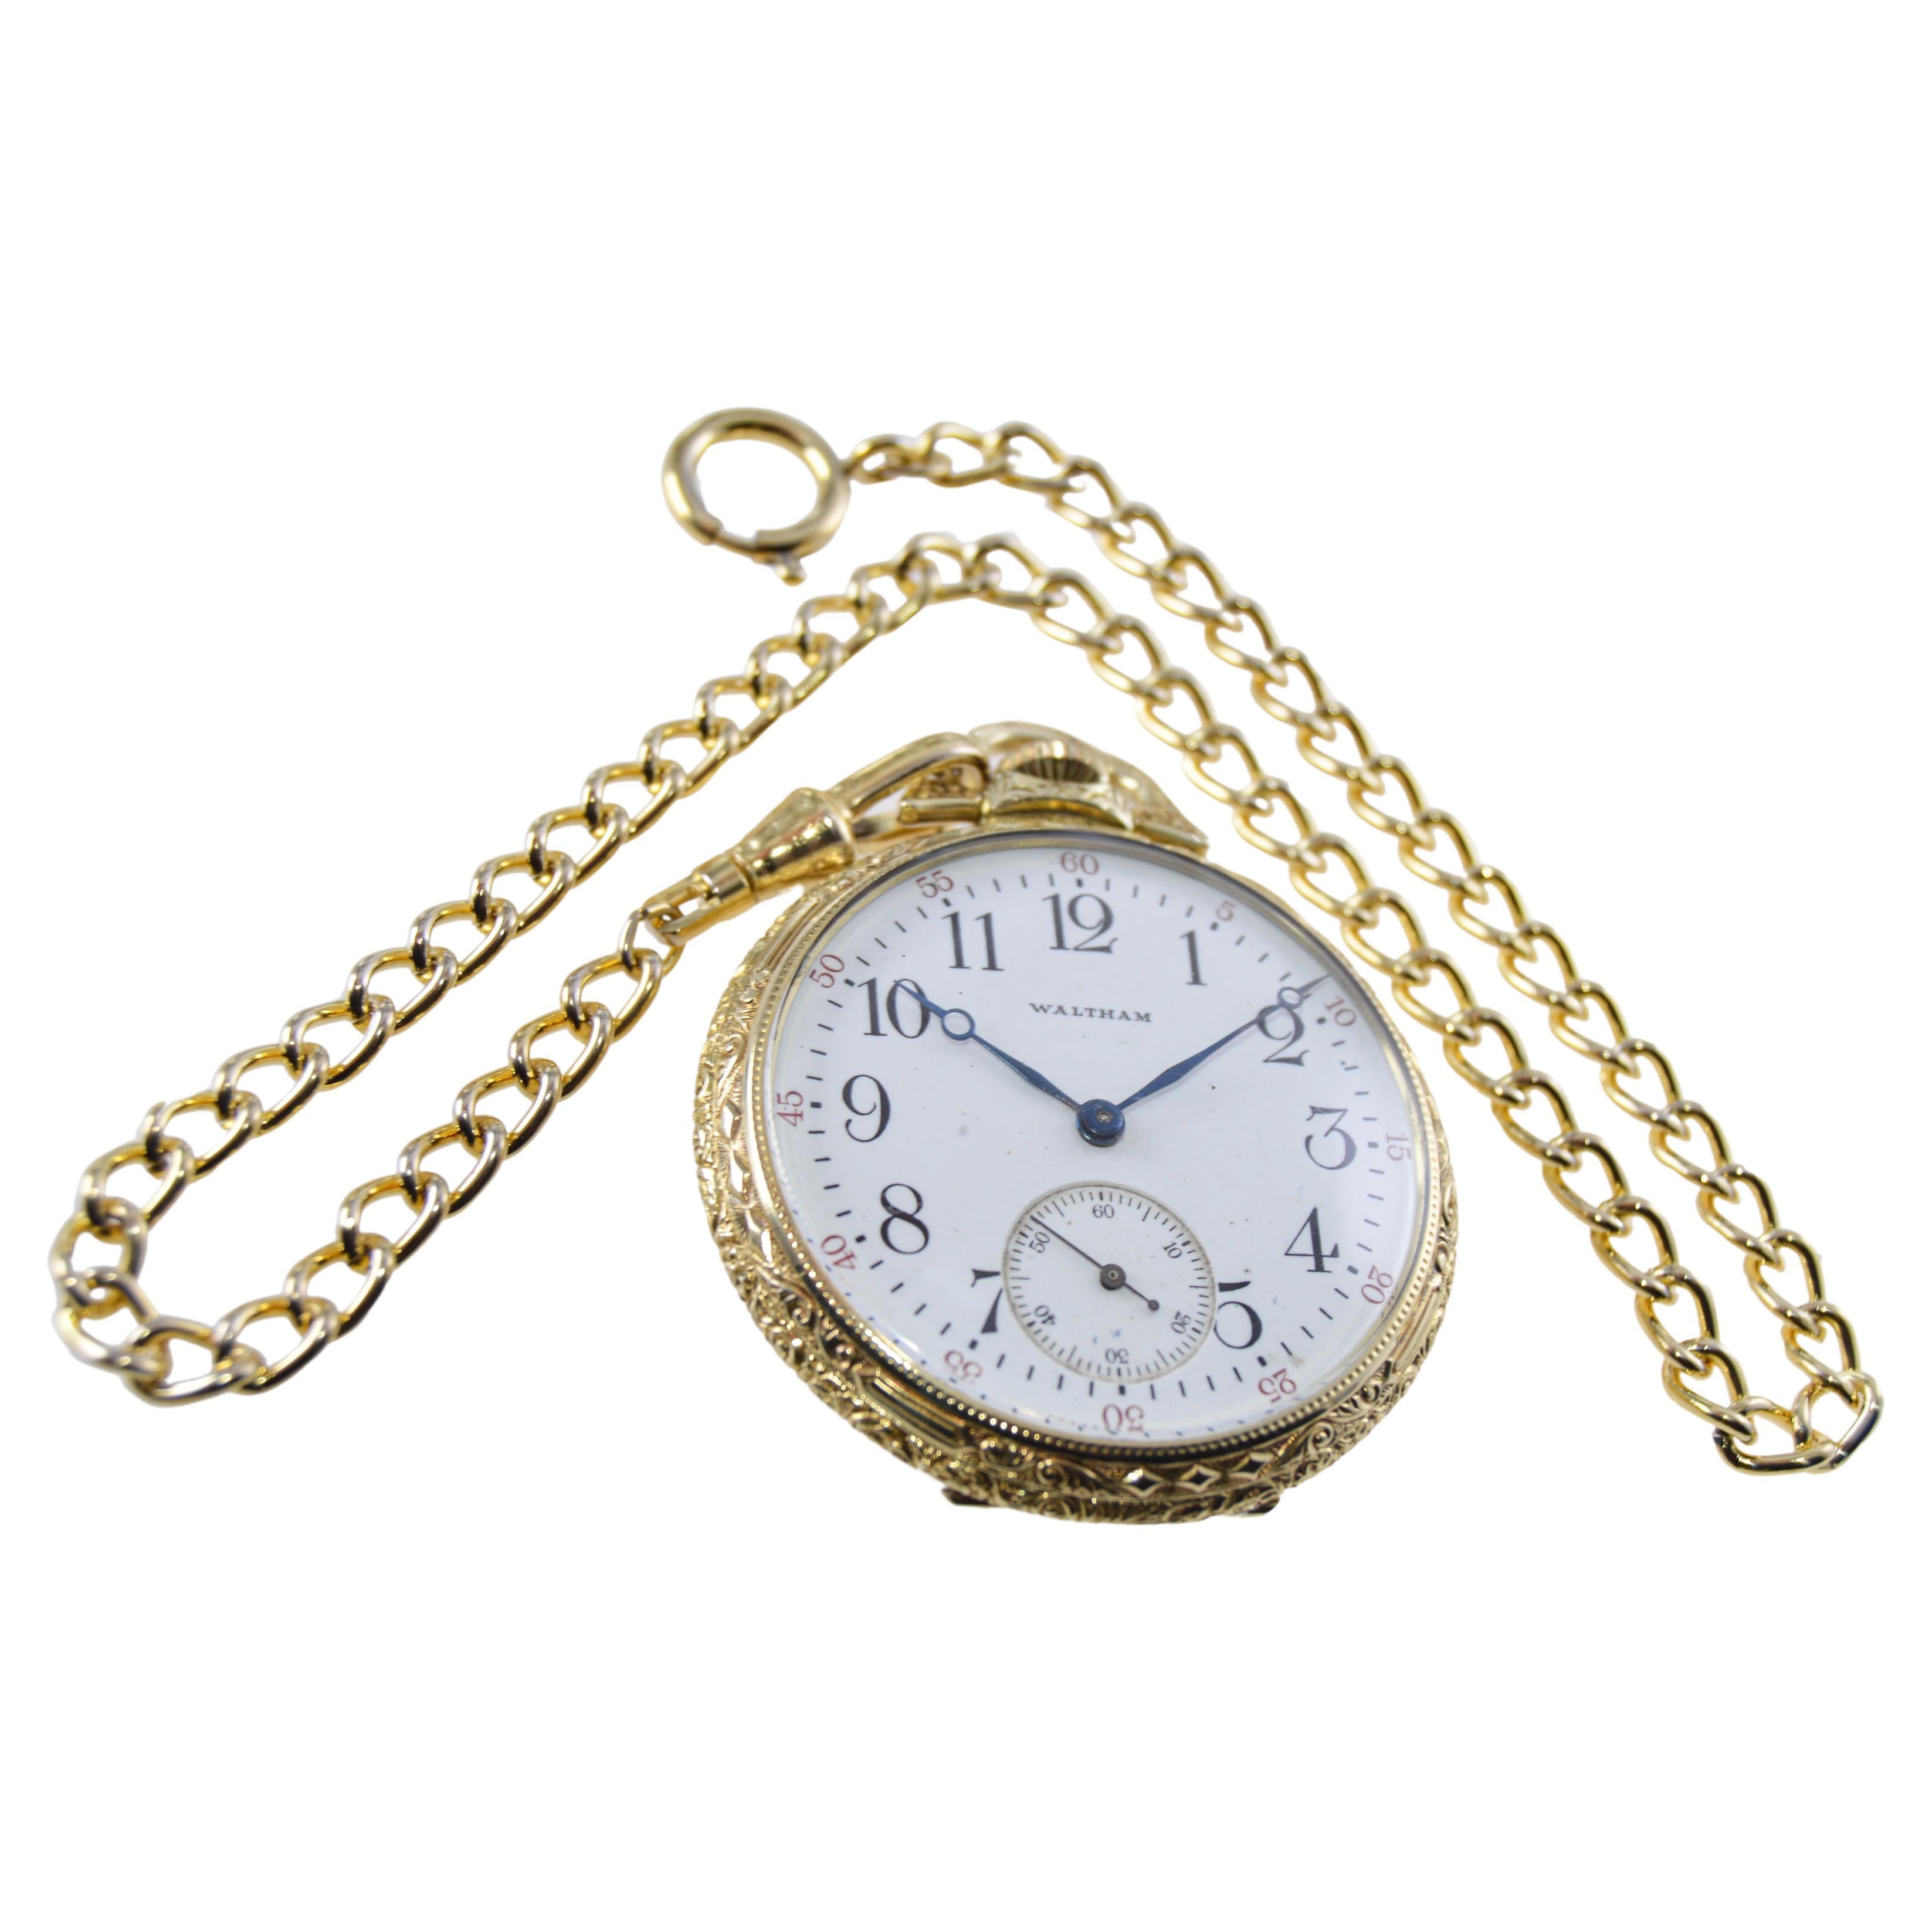 FACTORY / HOUSE: Waltham Watch Company
STYLE / REFERENCE: Open Faced Hand Engraved Pocket Watch
METAL / MATERIAL: Yellow Gold Filled
CIRCA / YEAR: 1908 
DIMENSIONS / SIZE: Diameter 45mm
MOVEMENT / CALIBER: Manual Winding / 17 Jewels / 12 Size
DIAL /